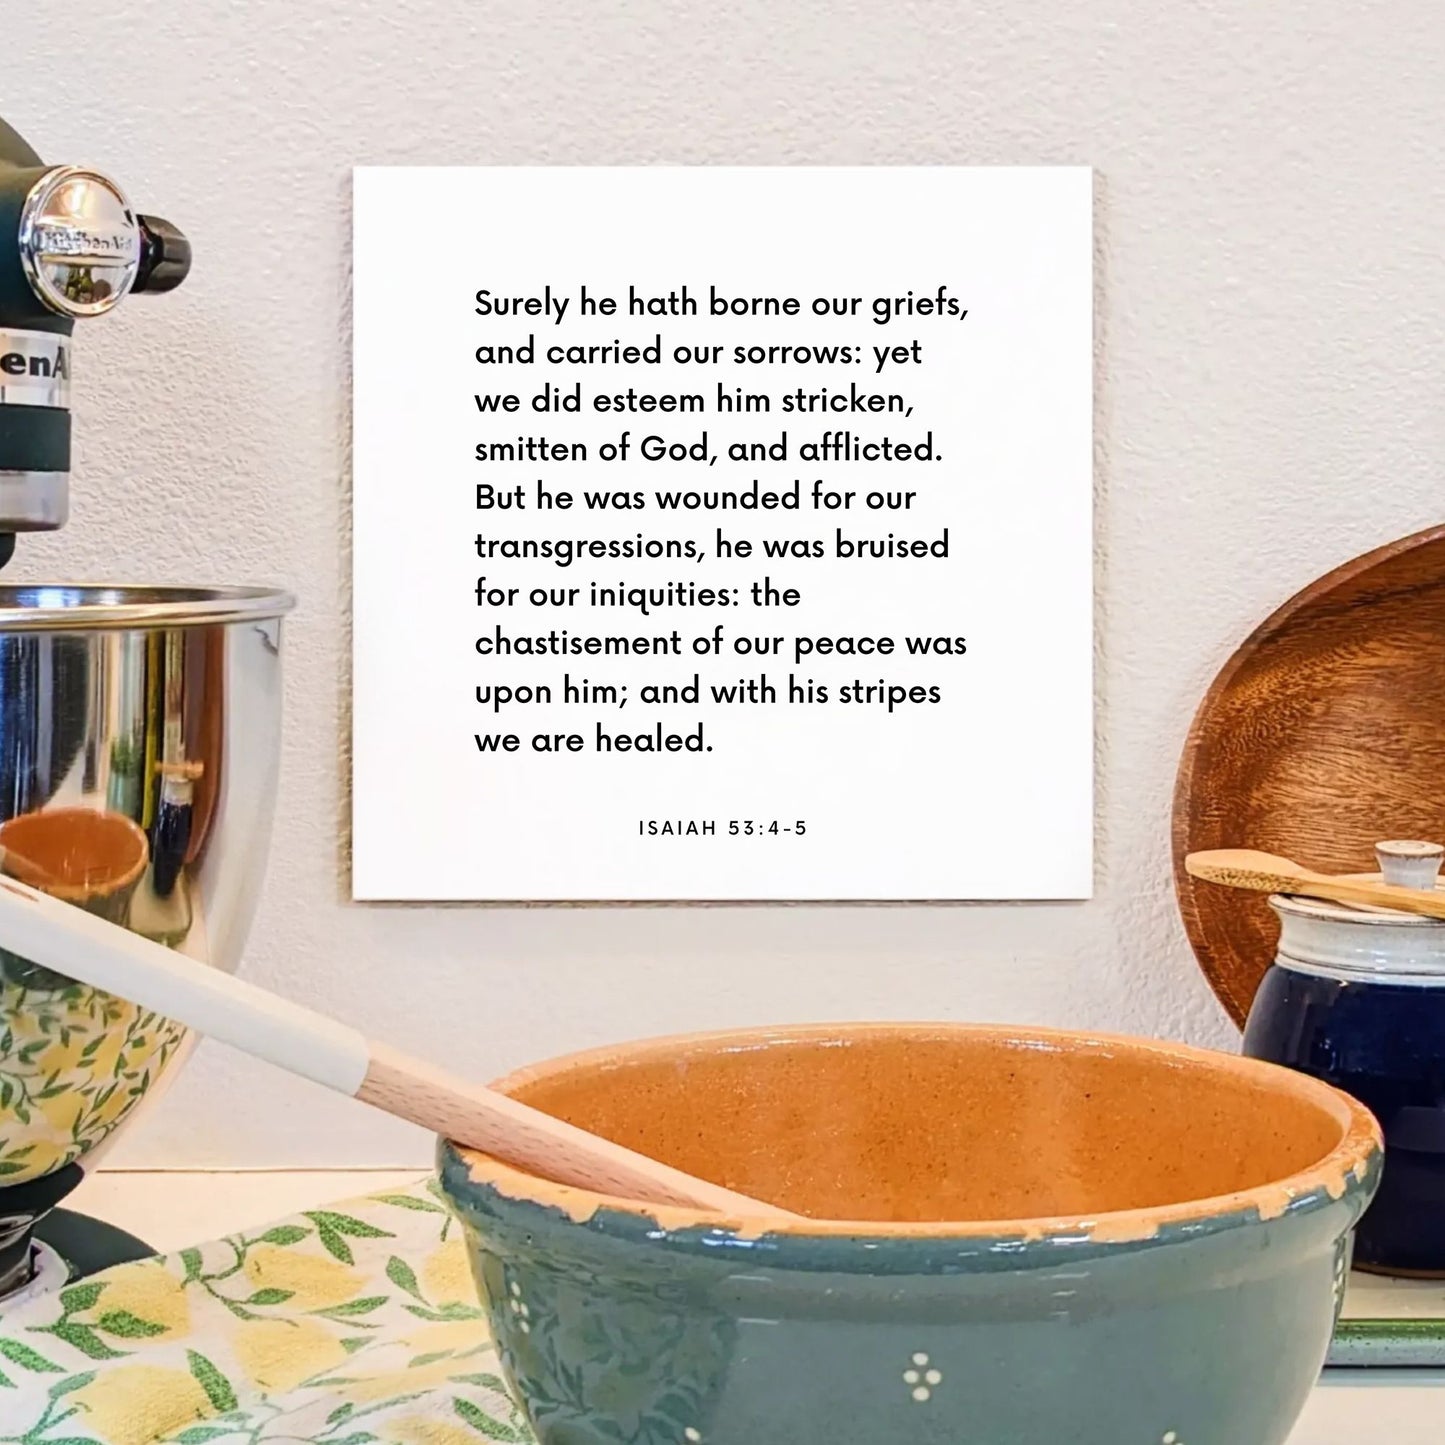 Kitchen mouting of the scripture tile for Isaiah 53:4-5 - "Surely he hath borne our griefs, and carried our sorrows"